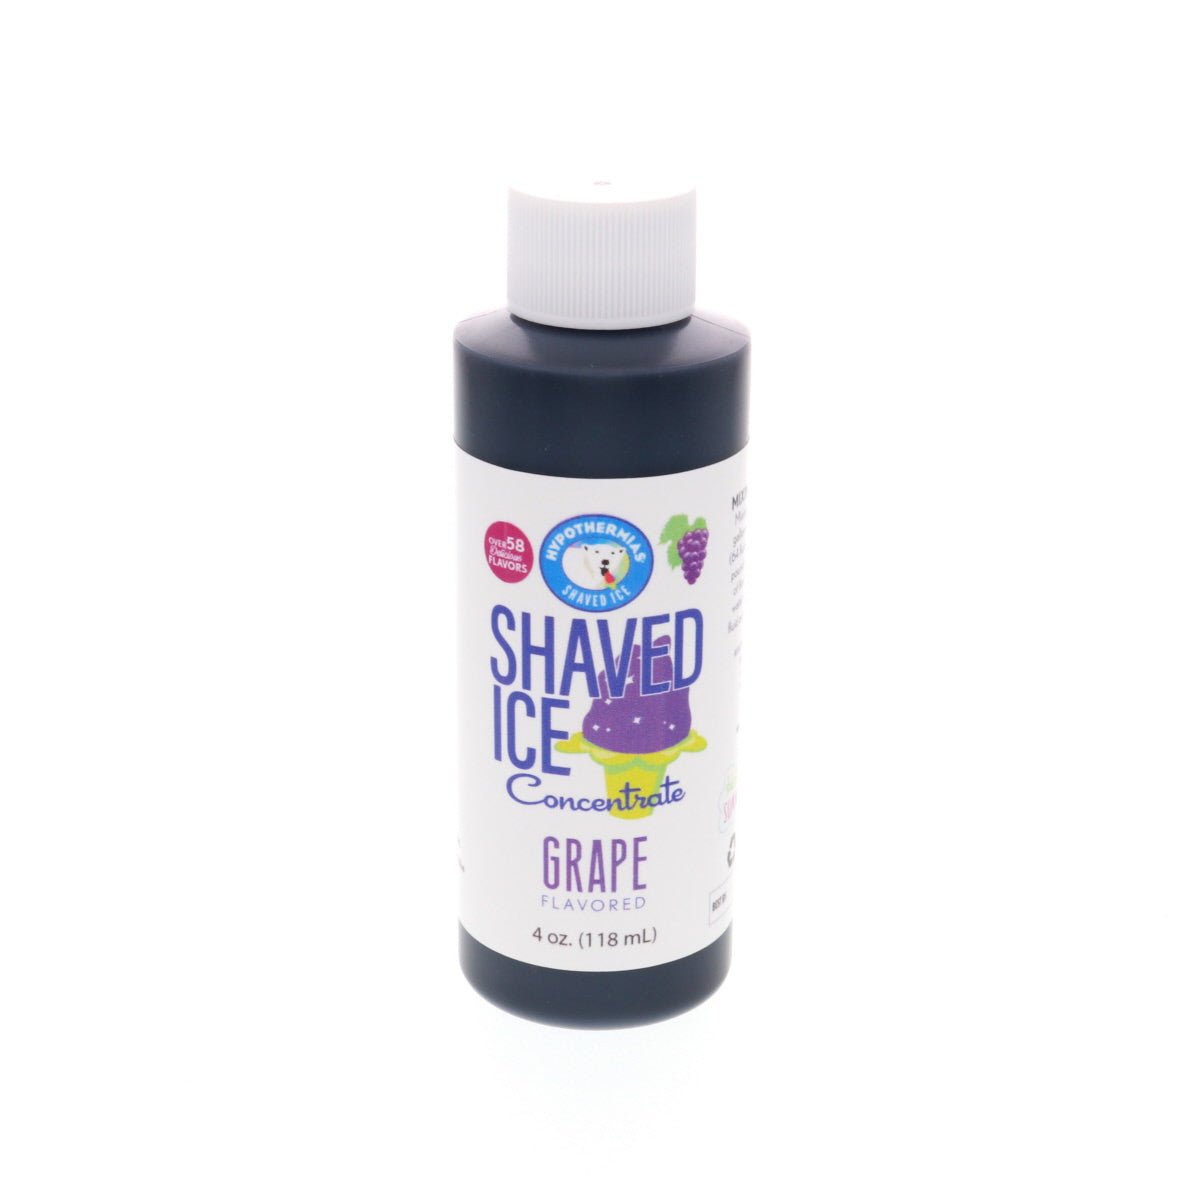 Hypothermias grape shaved ice or snow cone flavor syrup concentrate 4 Fl Oz.